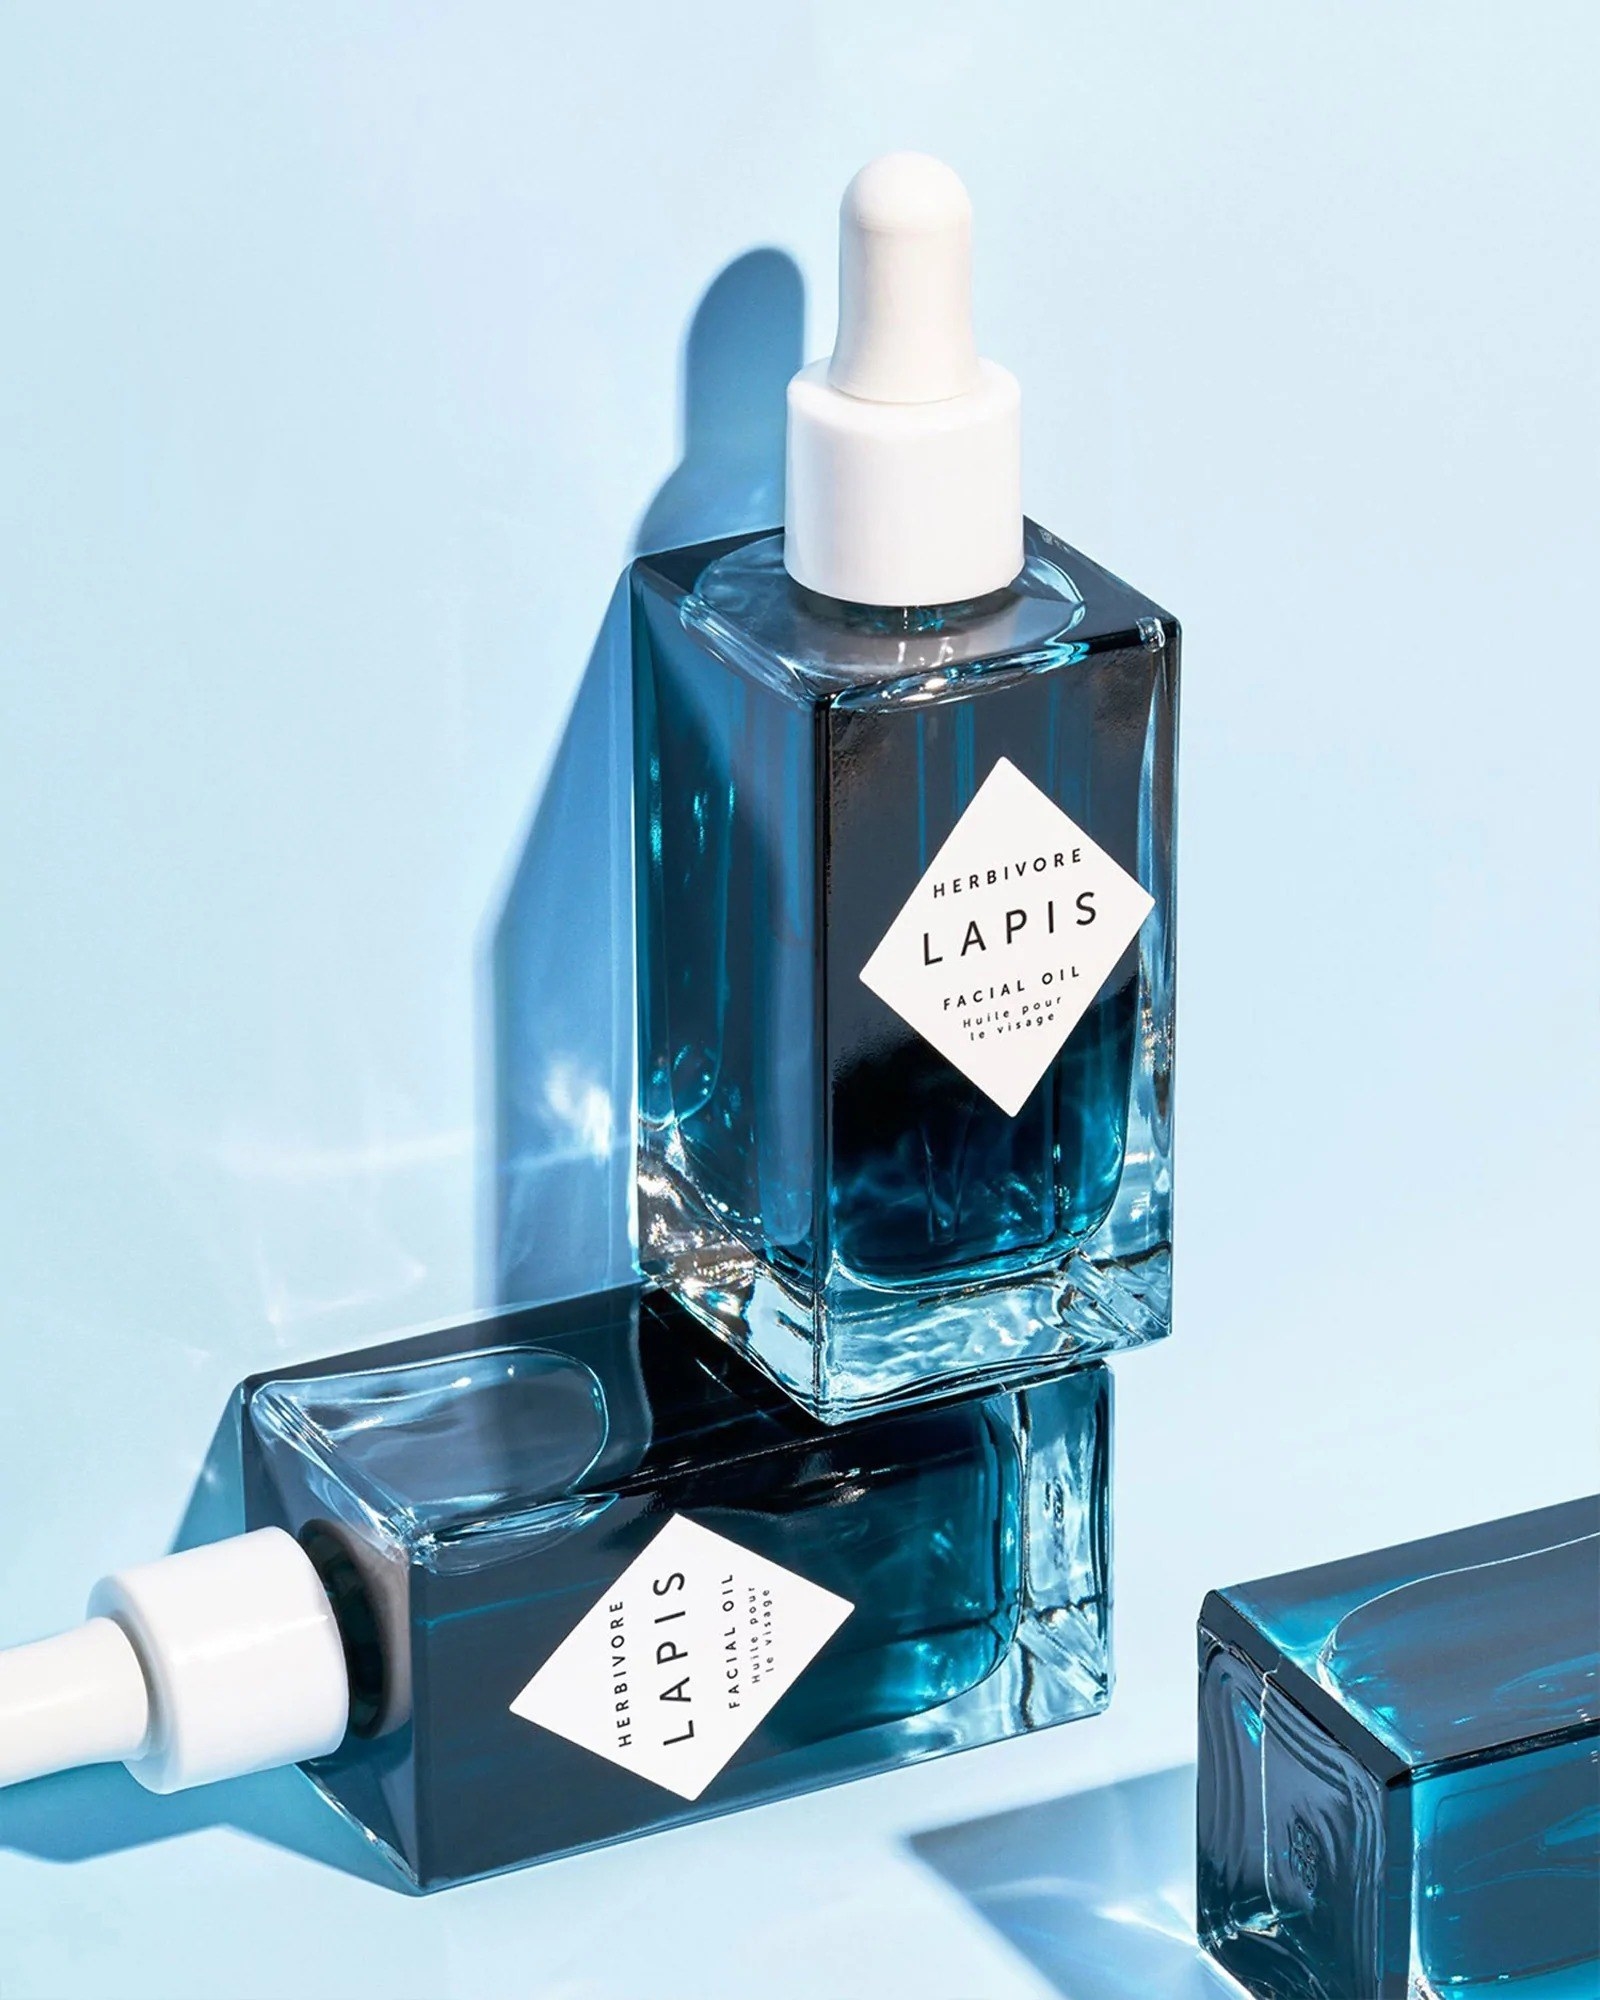 bottles of the Lapis facial oil filled with dark blue skincare formula